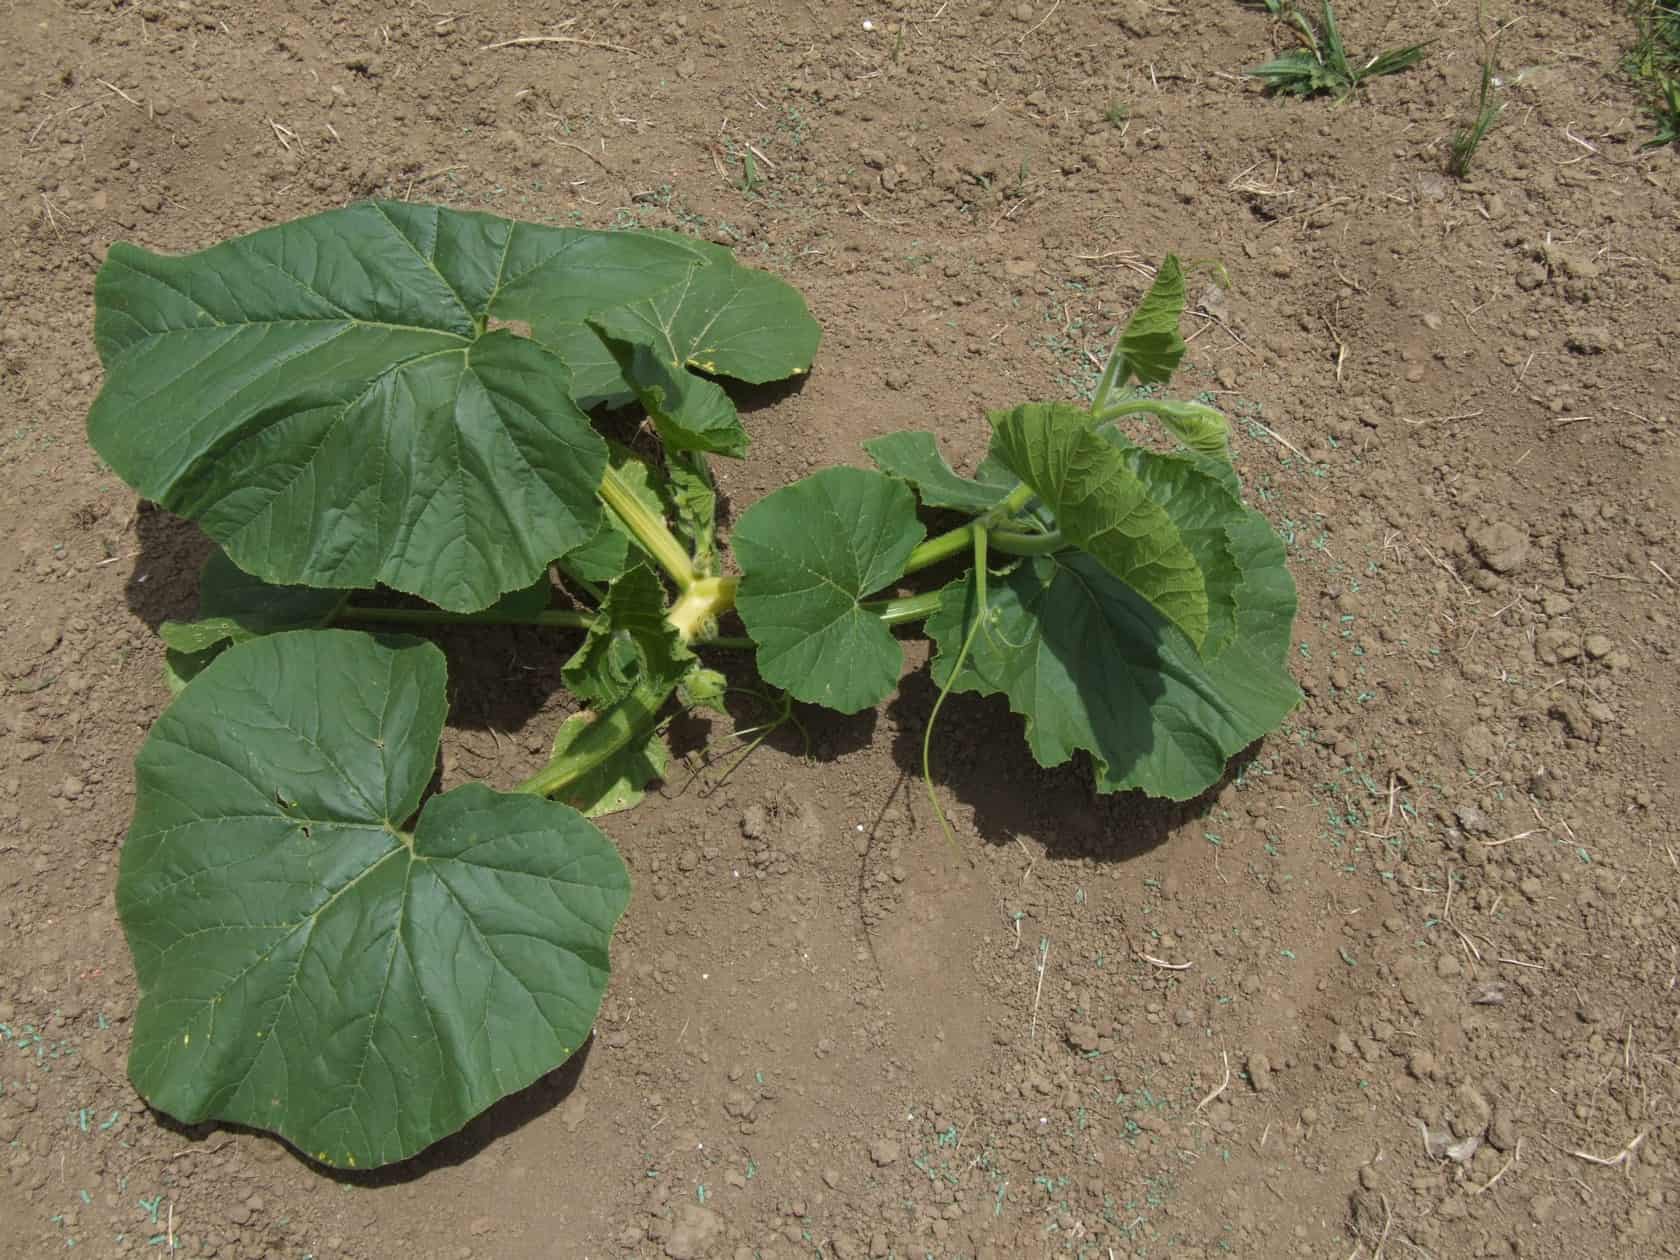 NZ giant pumpkin plant starting to grow in the pumpkin patch